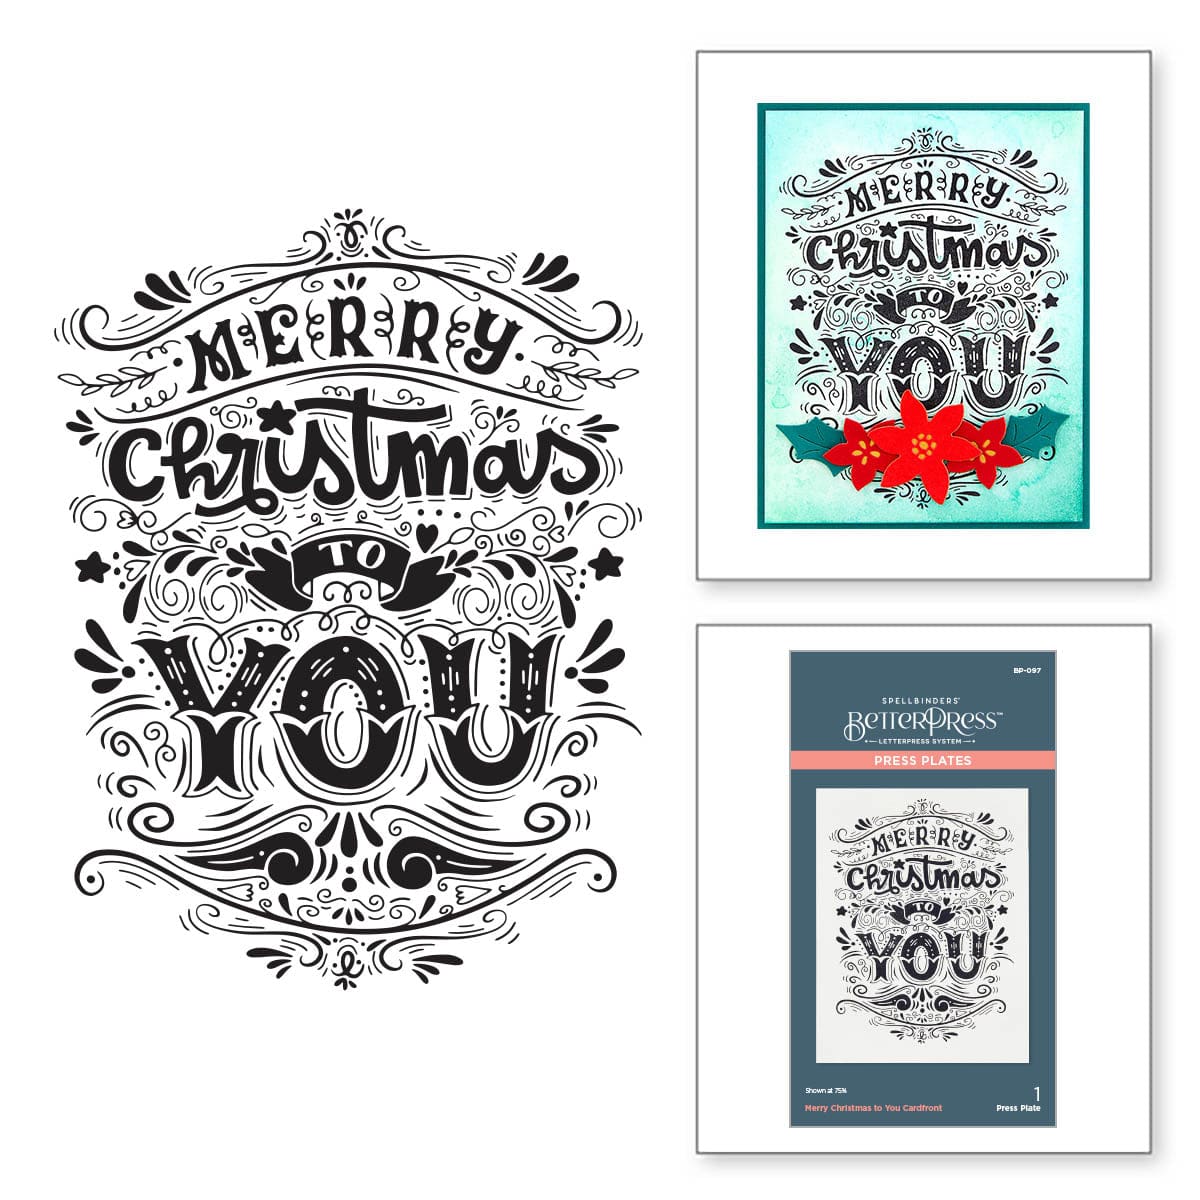 Spellbinders- BetterPress Christmas Collection - H MADE BOUTIQUE